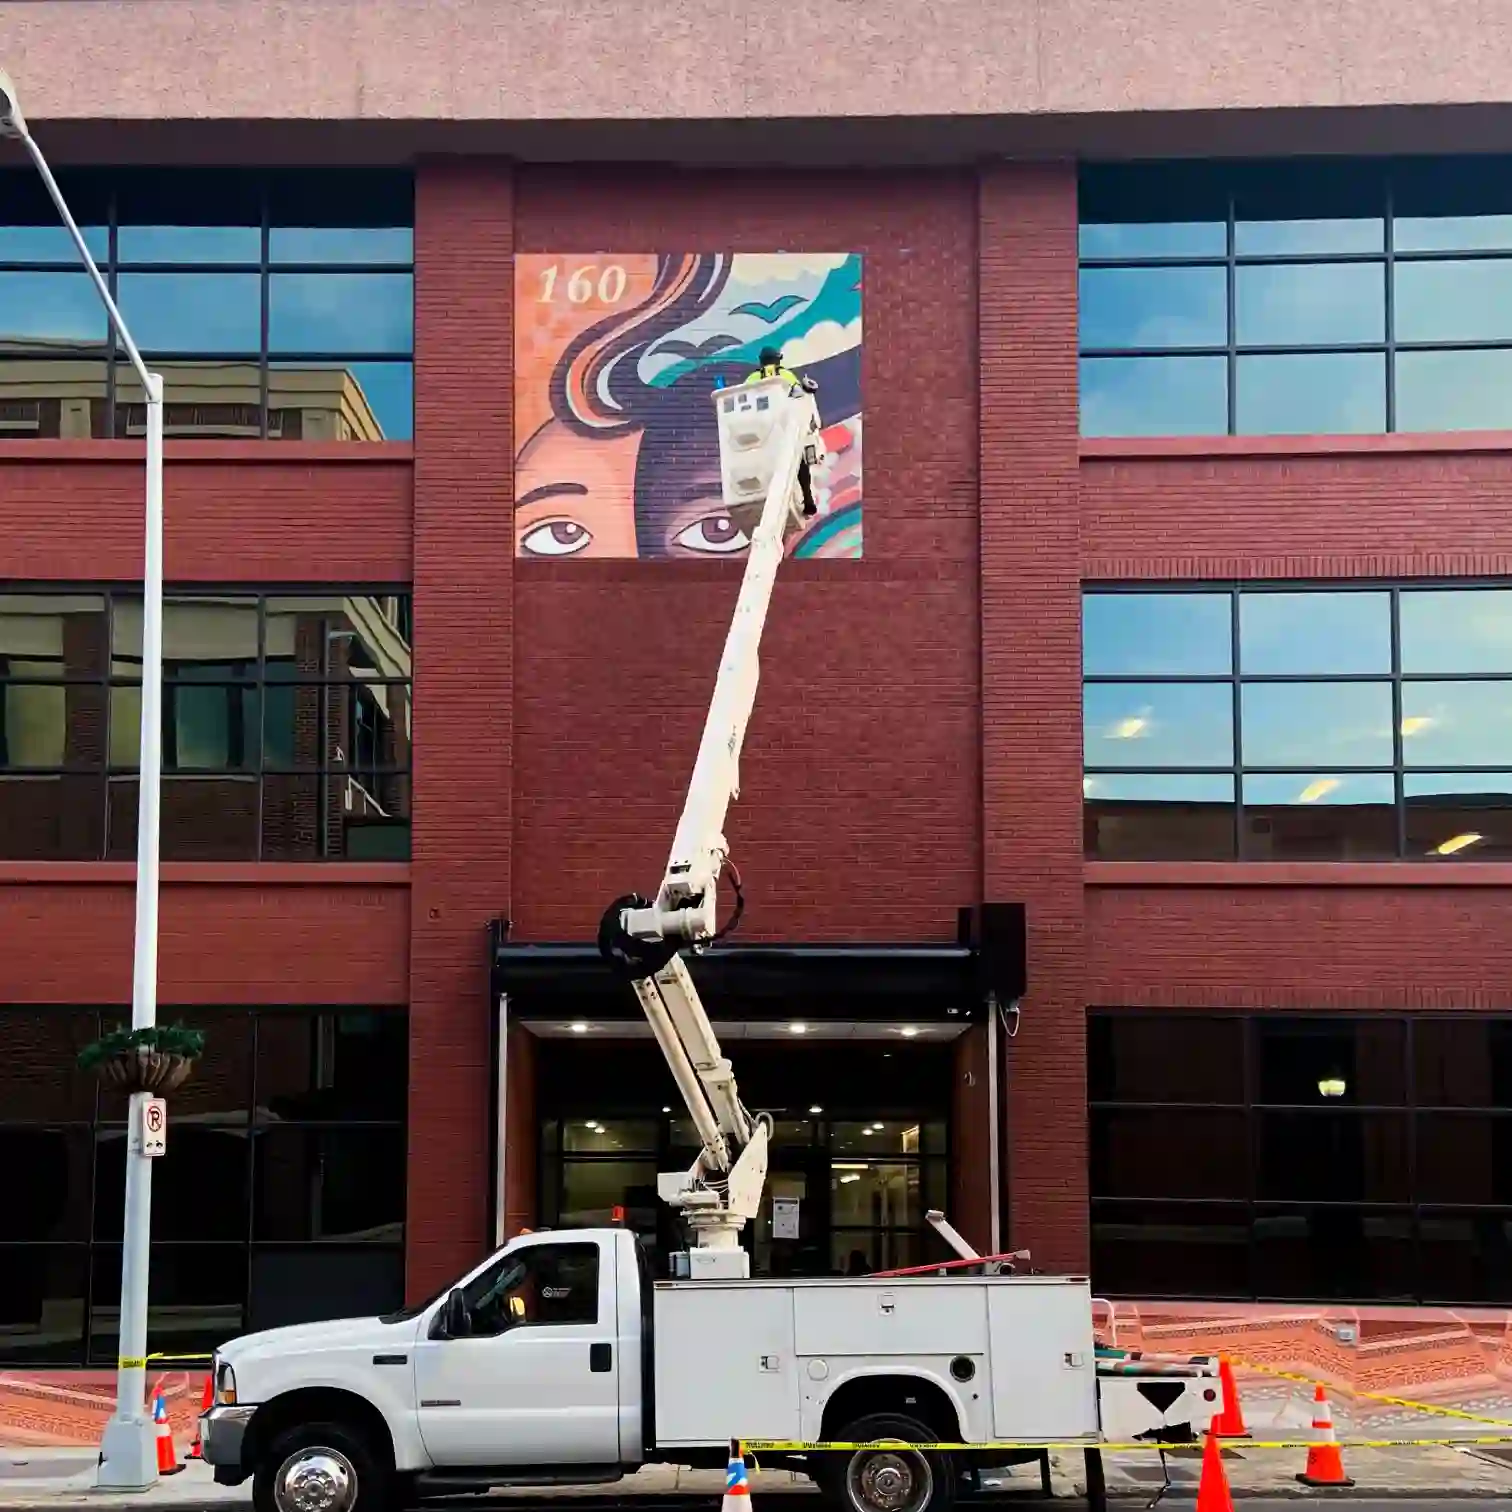 An image of a company installing artwork on the side of a building.